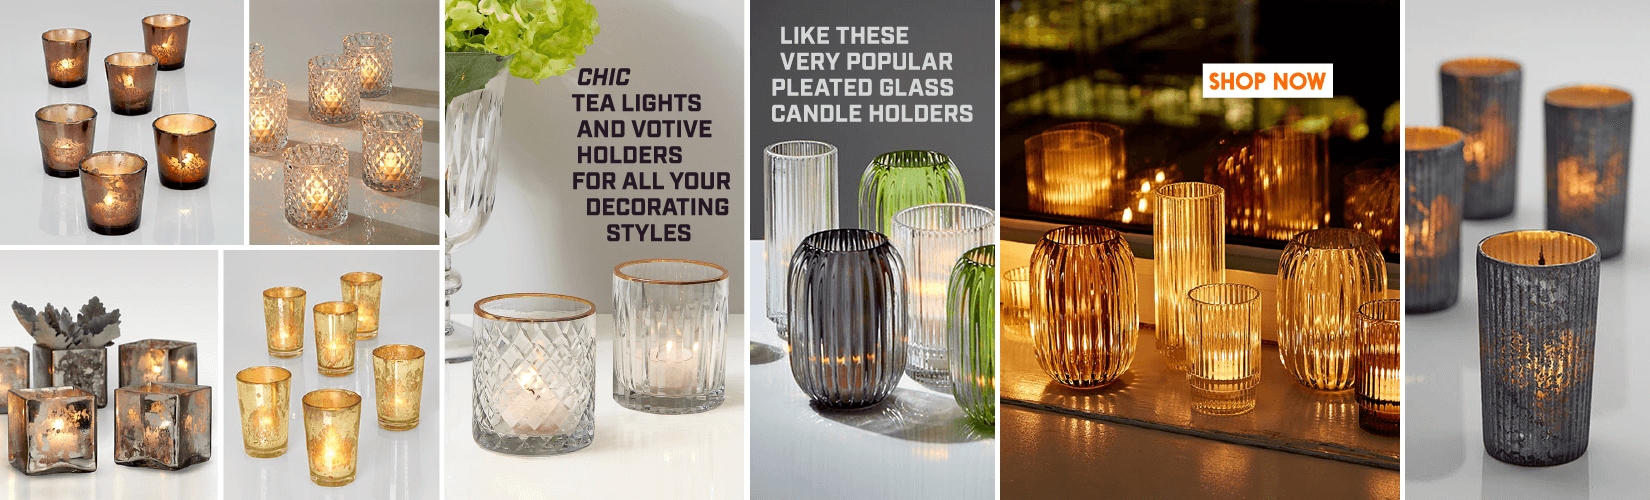 Pleated Glass Votives